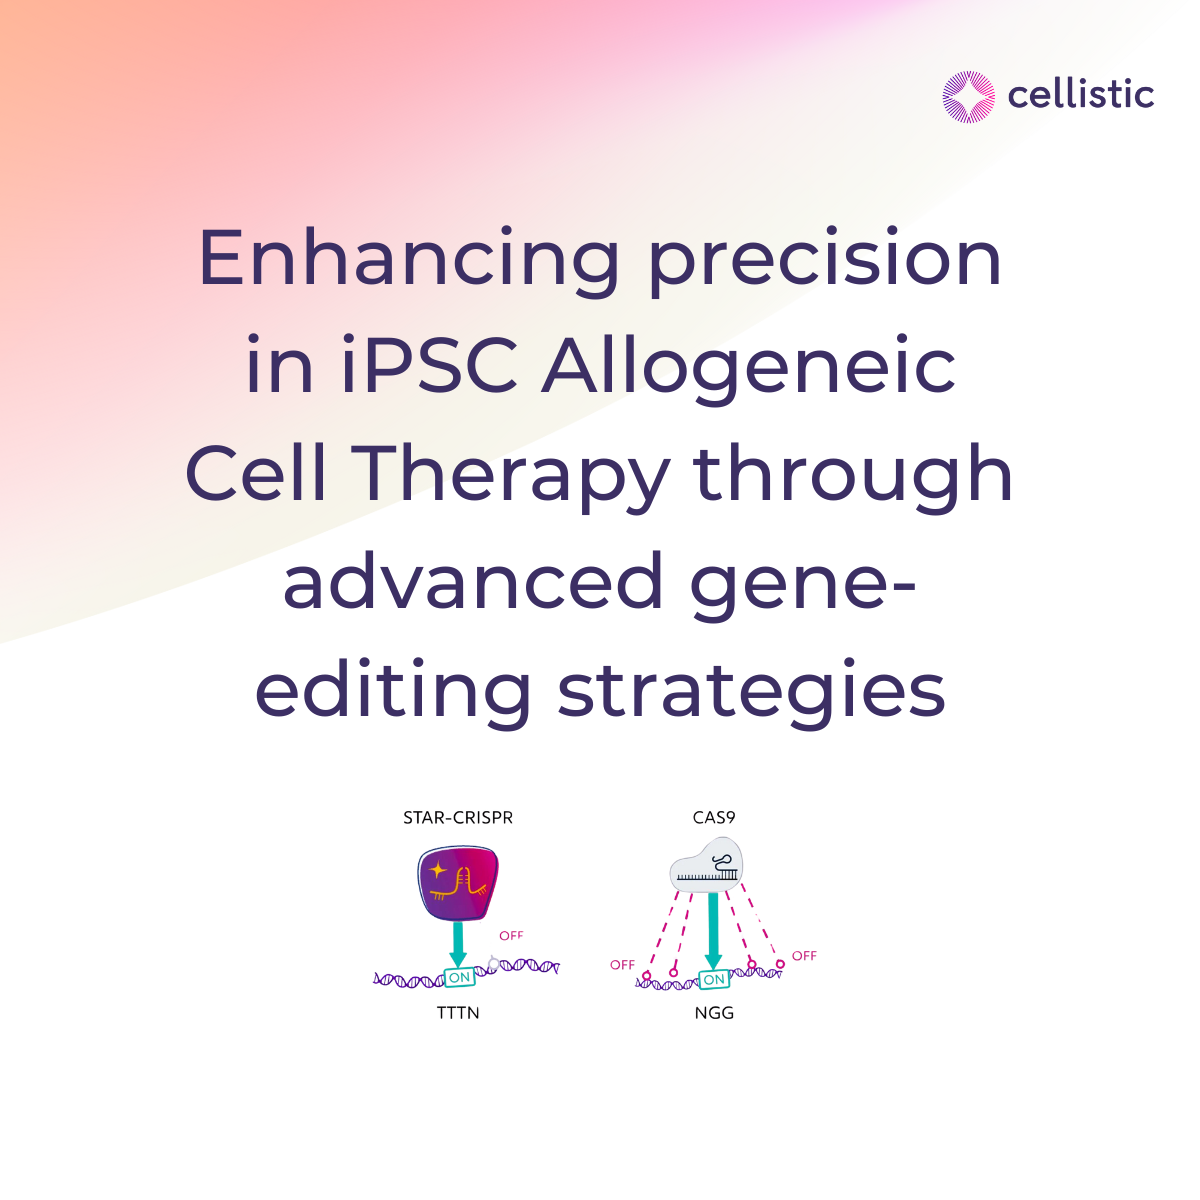 Enhancing precision in iPSC Allogeneic Cell Therapy through advanced gene-editing strategies